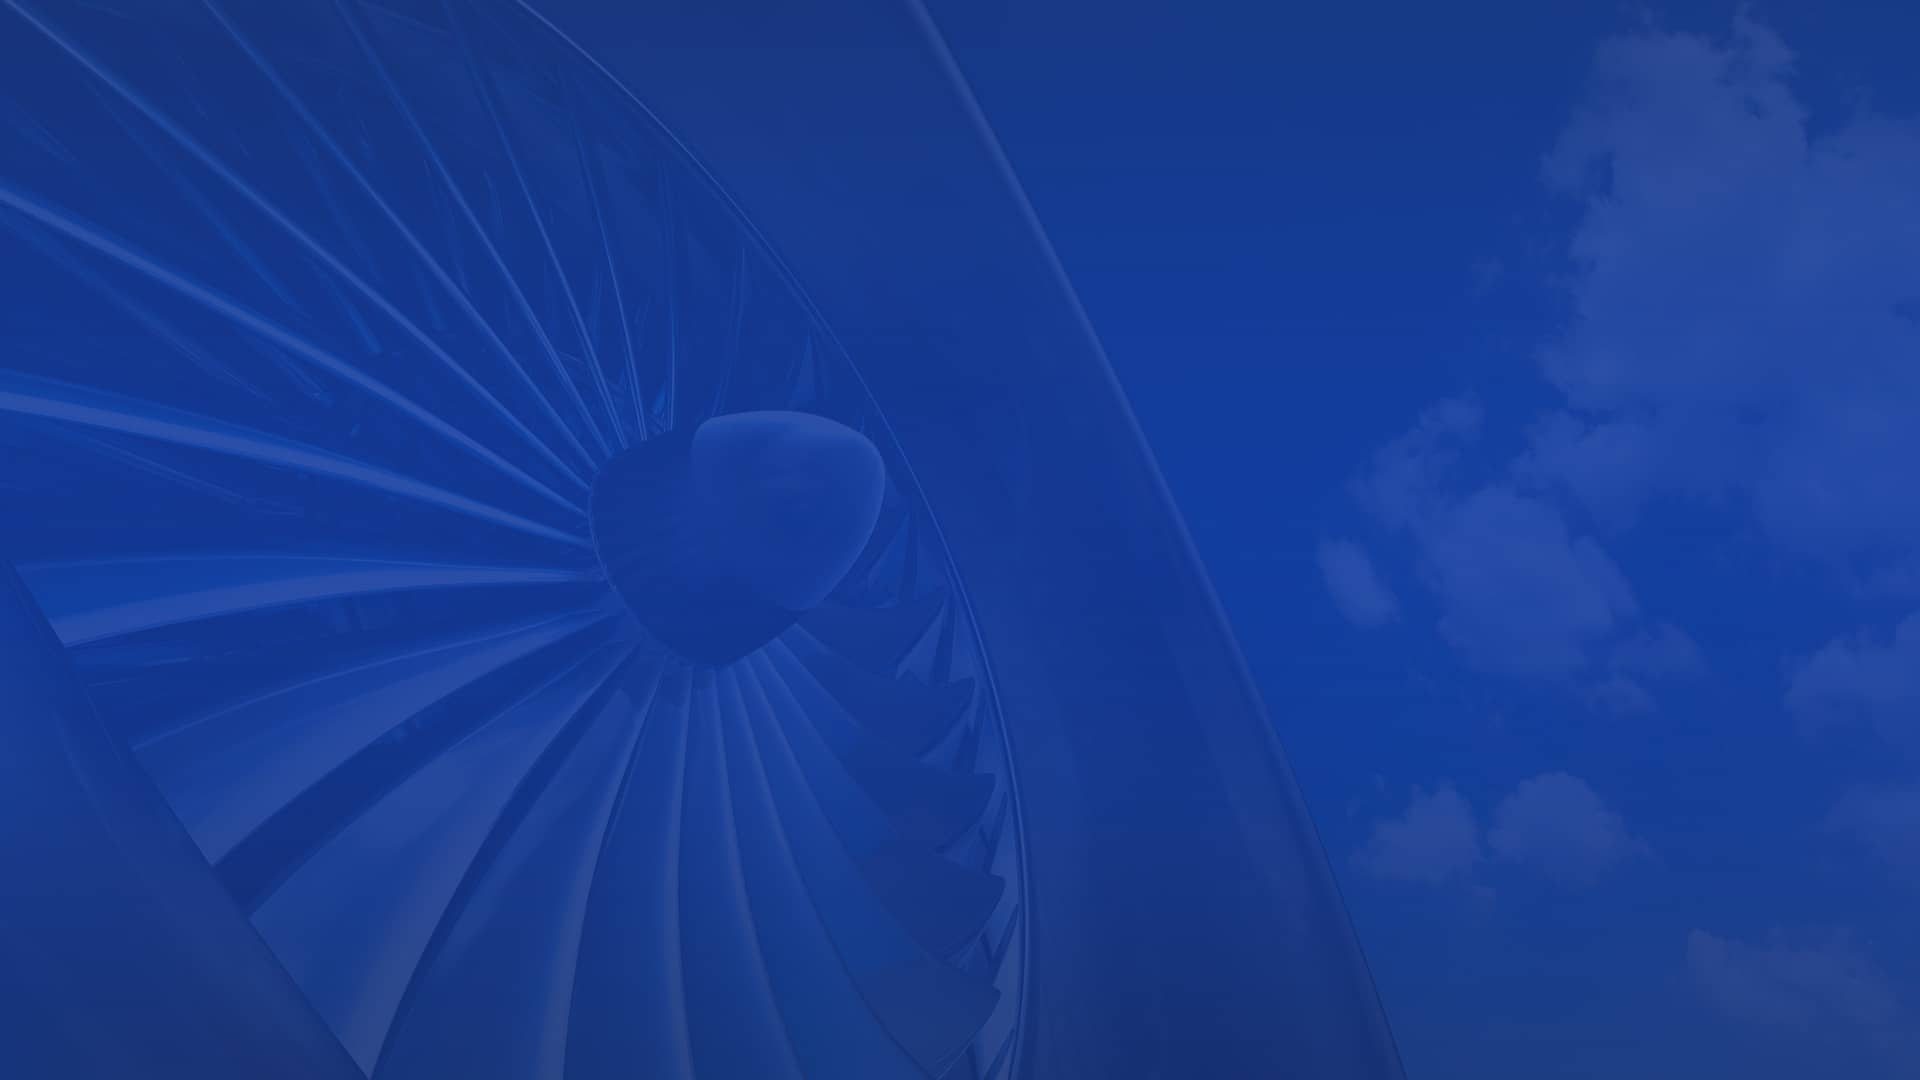 Close up aircraft turbine on blue sky with white clouds symbolizes aerospace industries